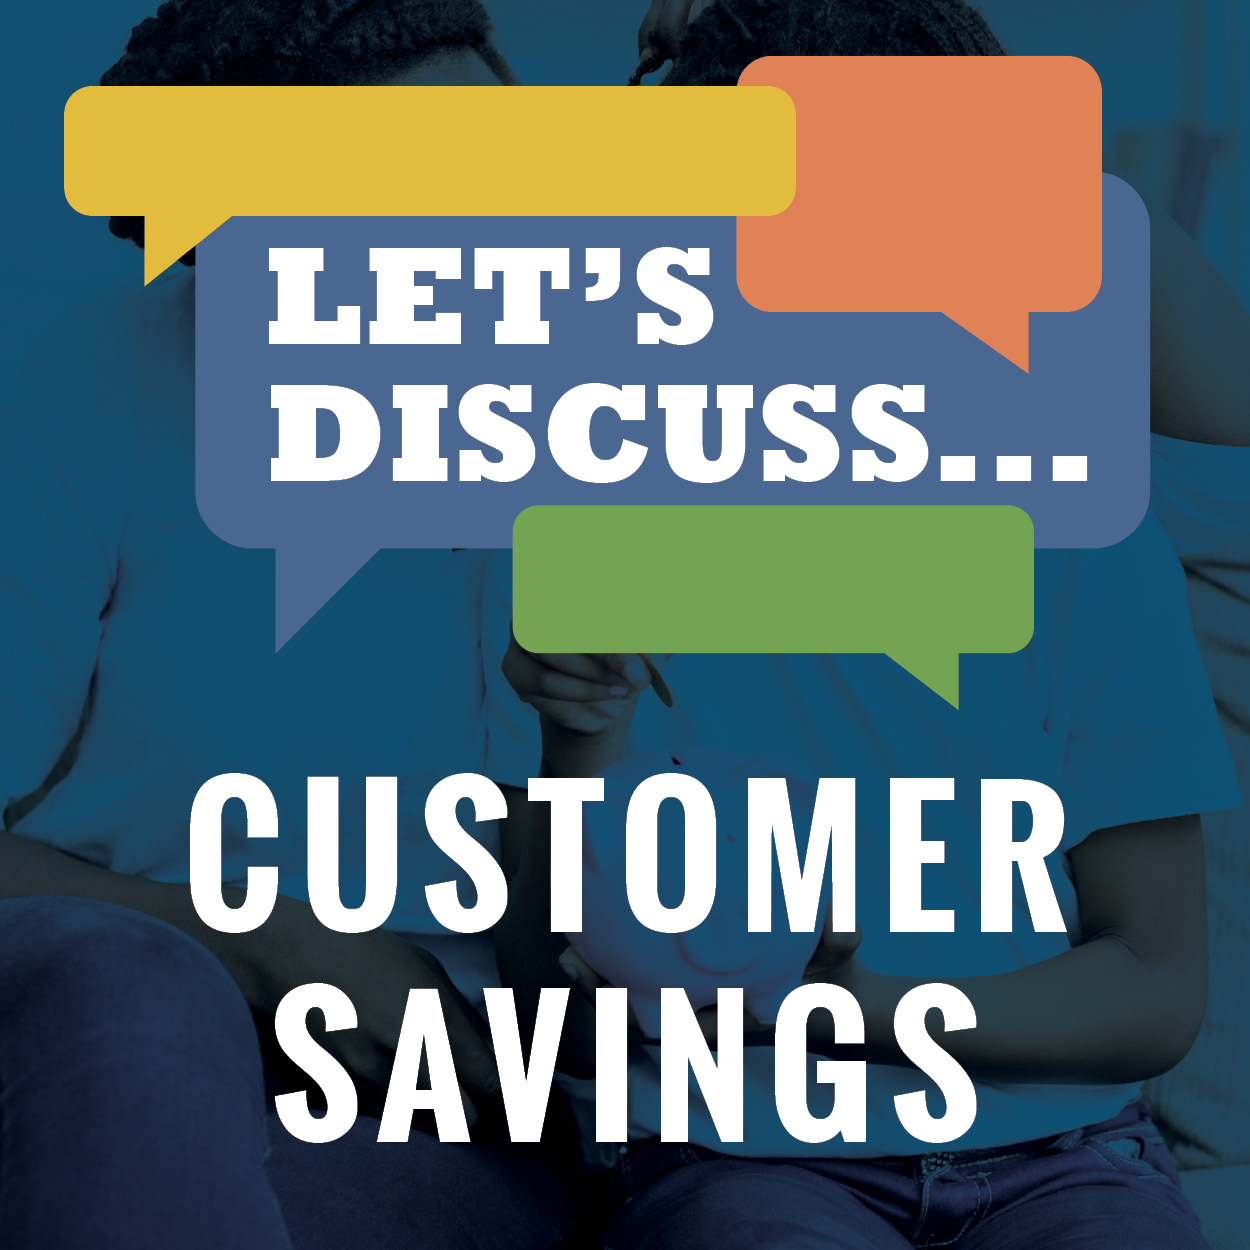 Photo for CITY OF THOMASVILLE PRESENTS &lsquo;LET&rsquo;S DISCUSS&hellip;&rsquo; AIMED AT CUSTOMER SAVINGS